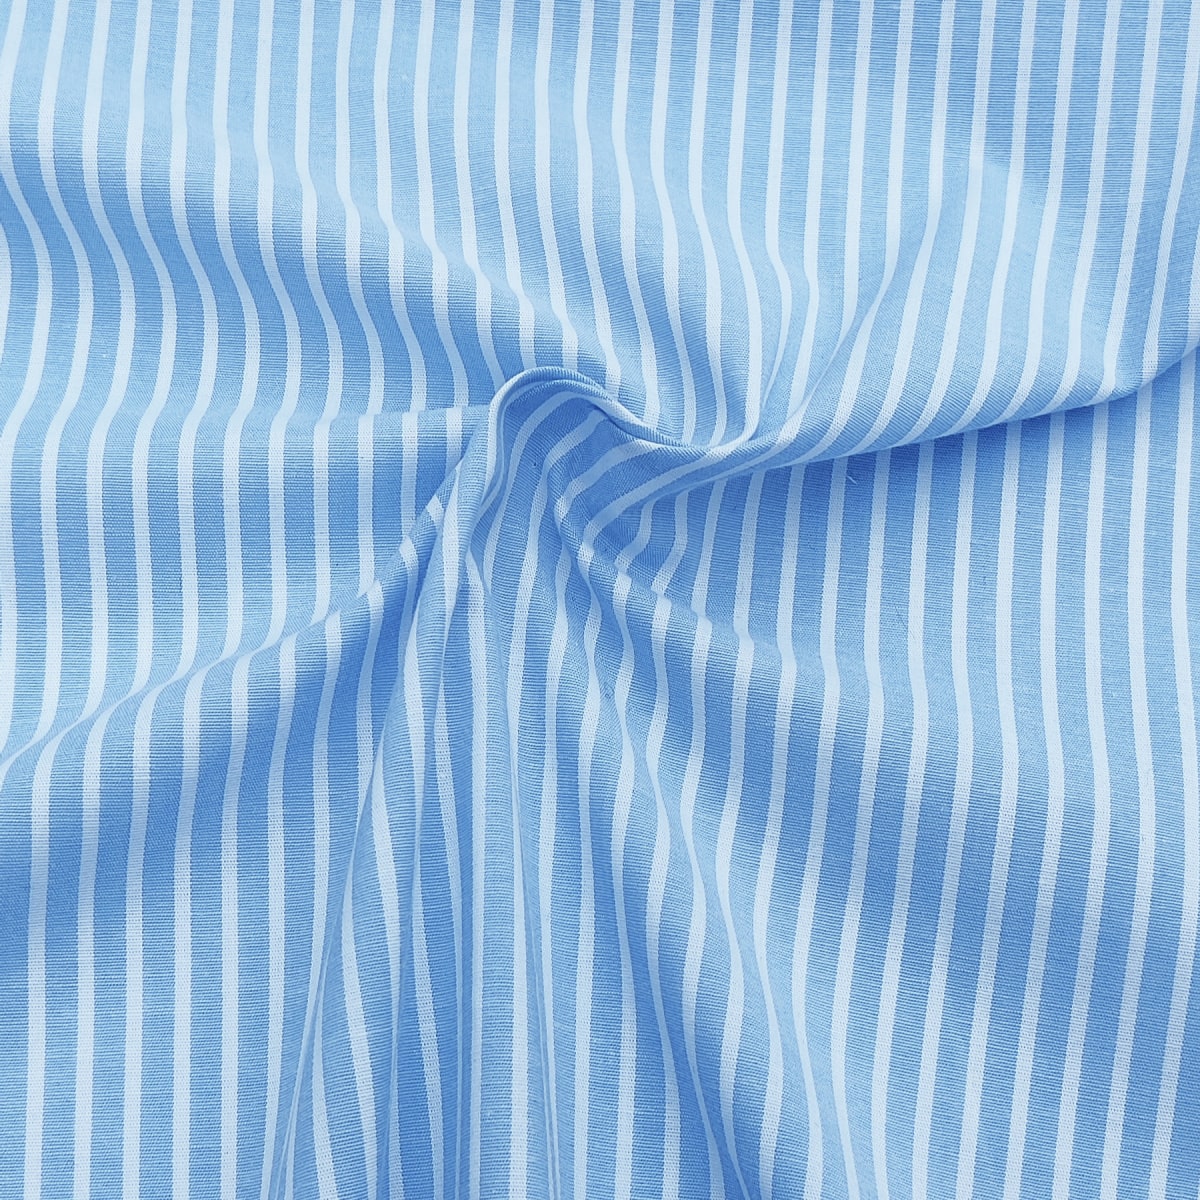 Yarn Dyed Cotton Fabric | Baby Blue & White Stripes